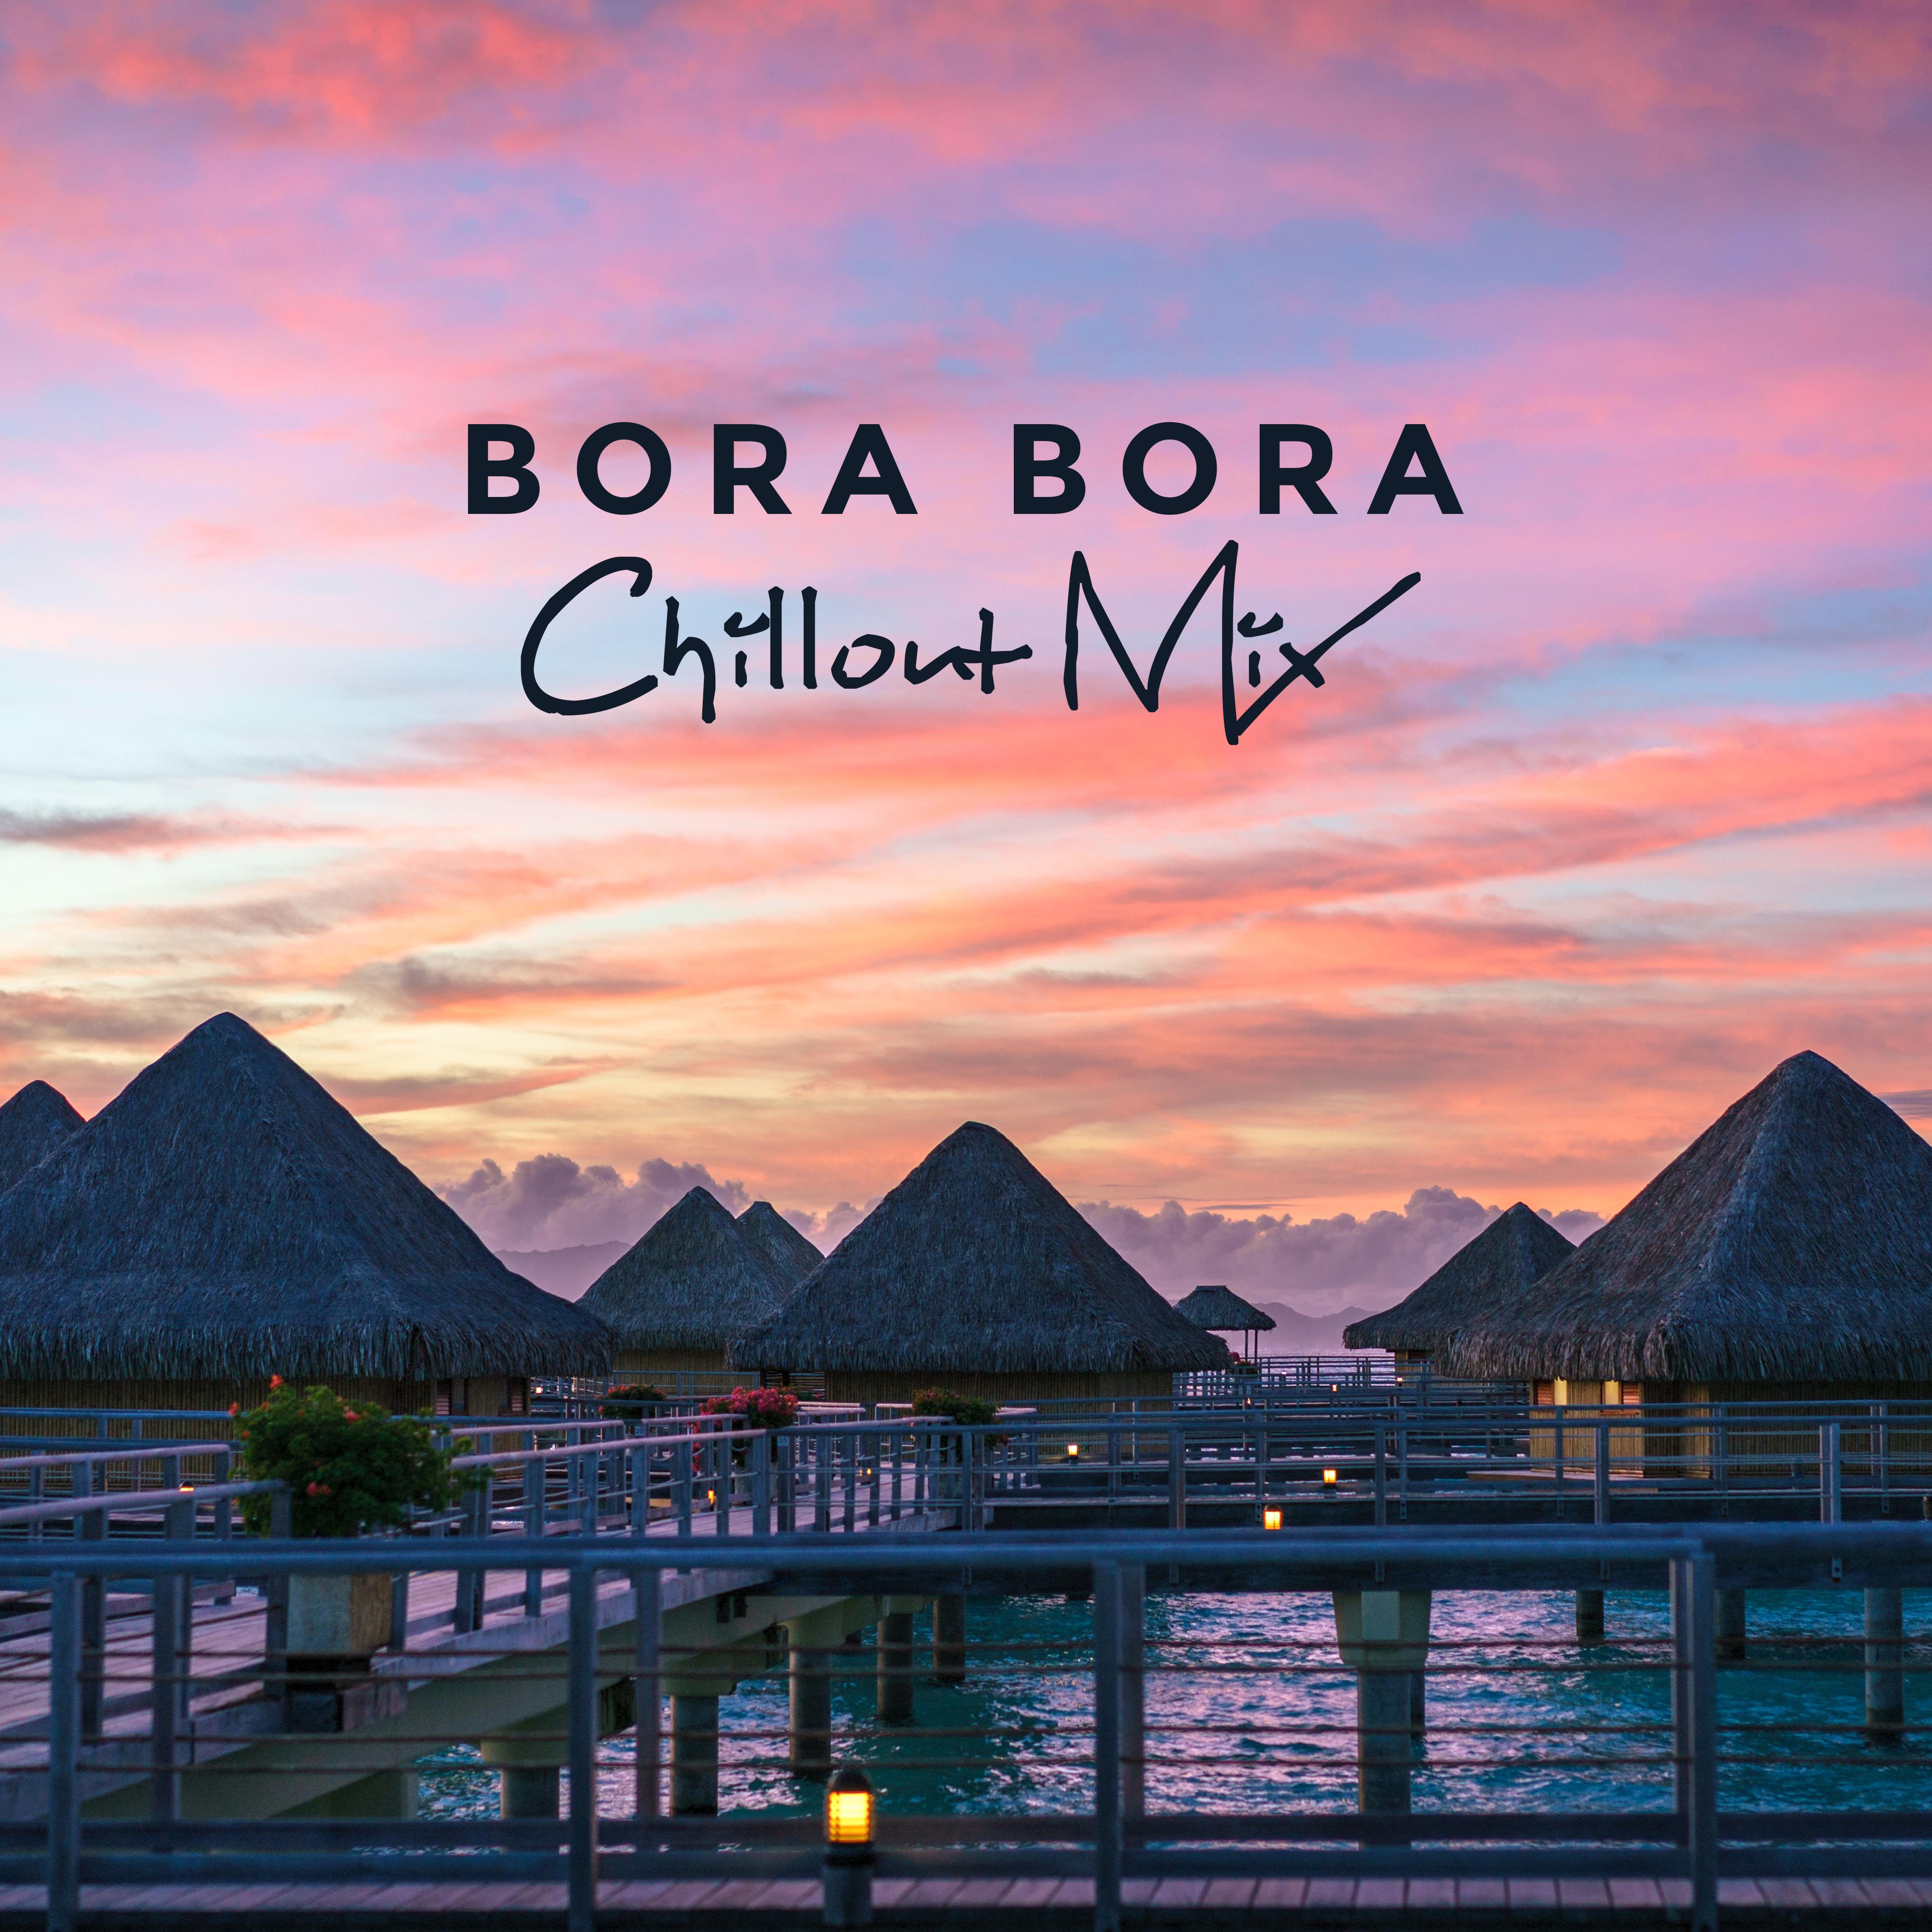 Bora Bora Chillout Mix: 2019 Vacation Total Relaxation Chill Out Cool Music, Best Summer Electronic Hits, Beautiful Ambients & Deep Beats, Tropical Chill Cocktail Bar